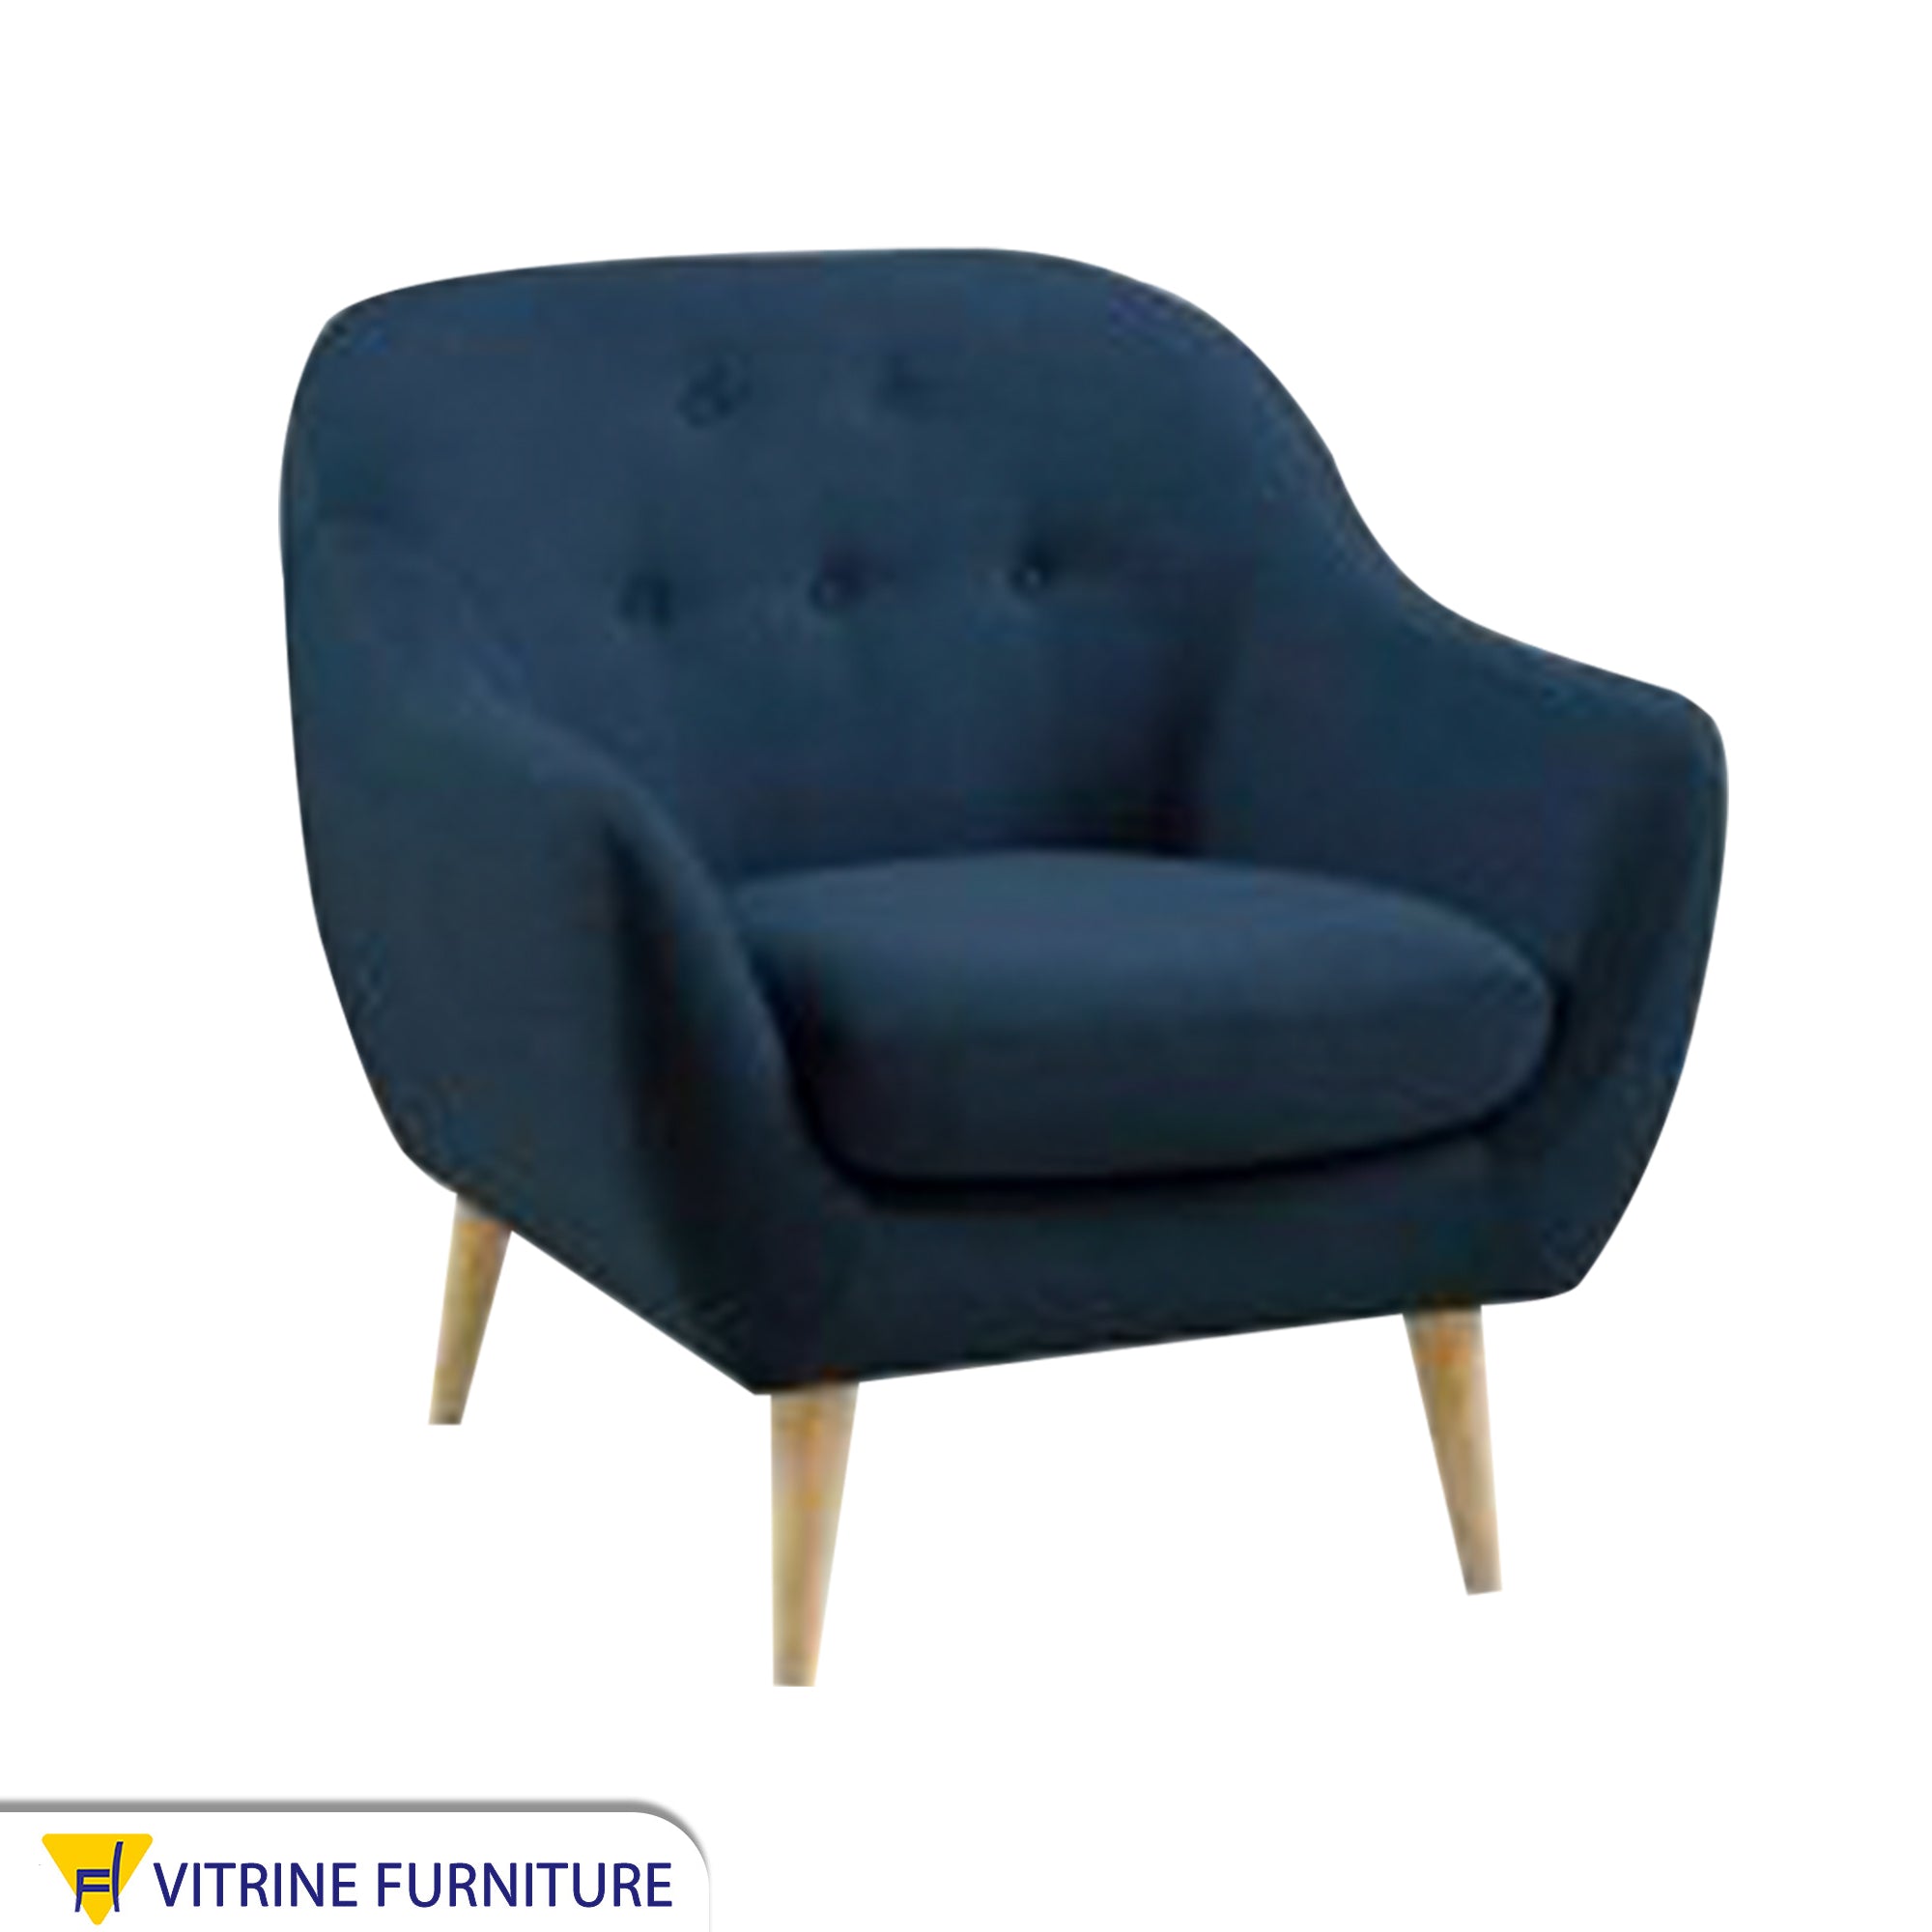 Navy blue Capotone beads chair with backrest